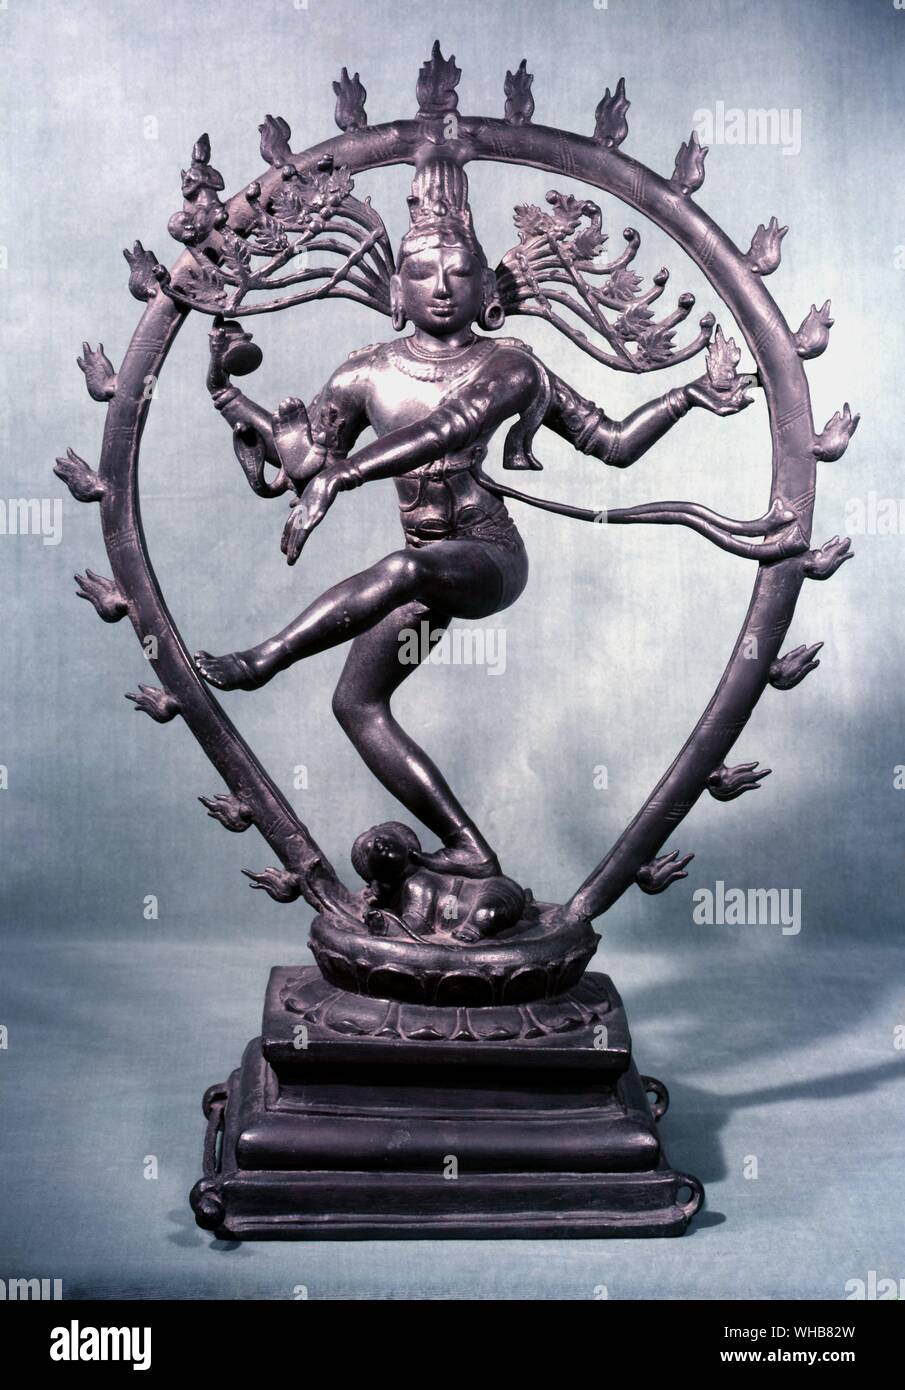 Shiva dancing - Shiva is considered to be the supreme deity in Shaivism, a denomination of Hinduism. . Stock Photo